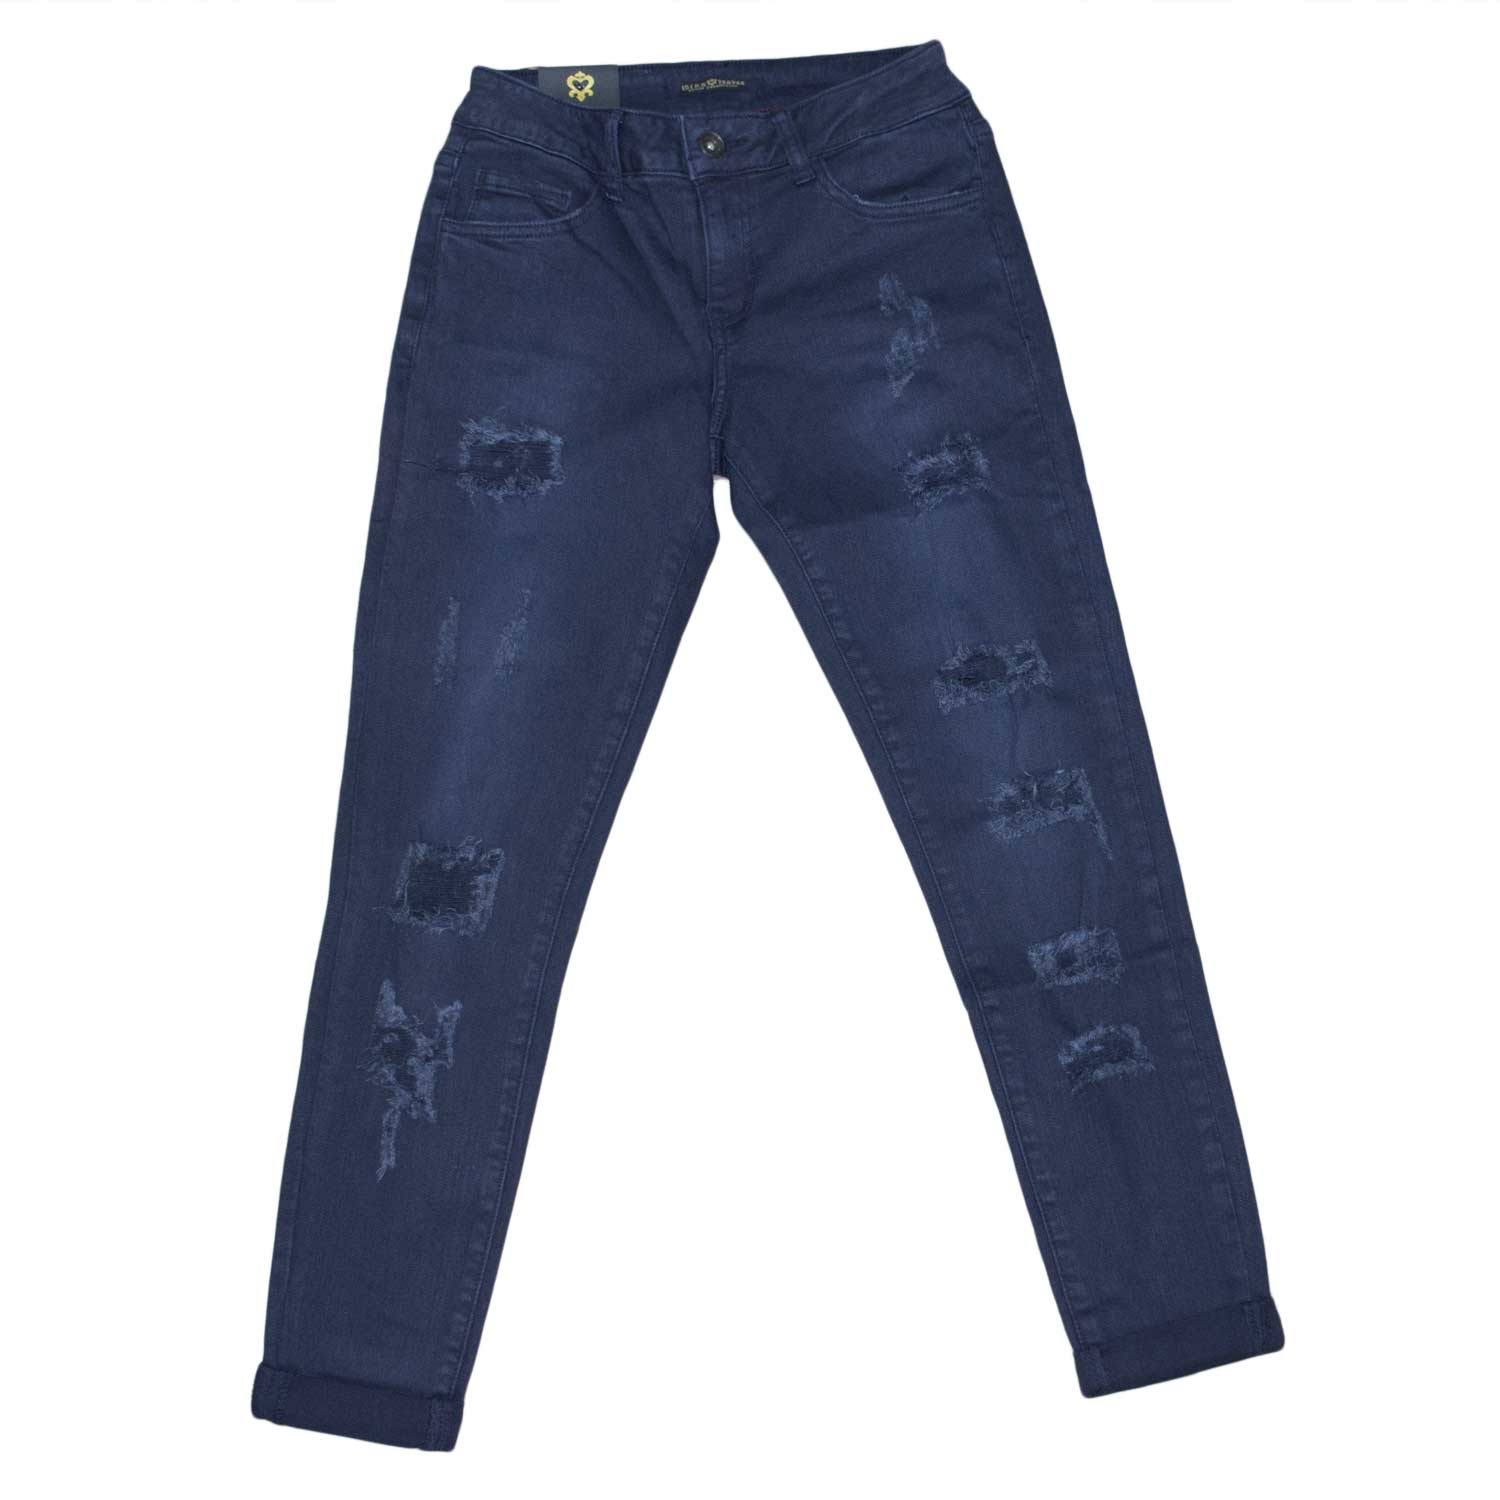 Jeans donna blu notte stracciato chic glamour made in italy.